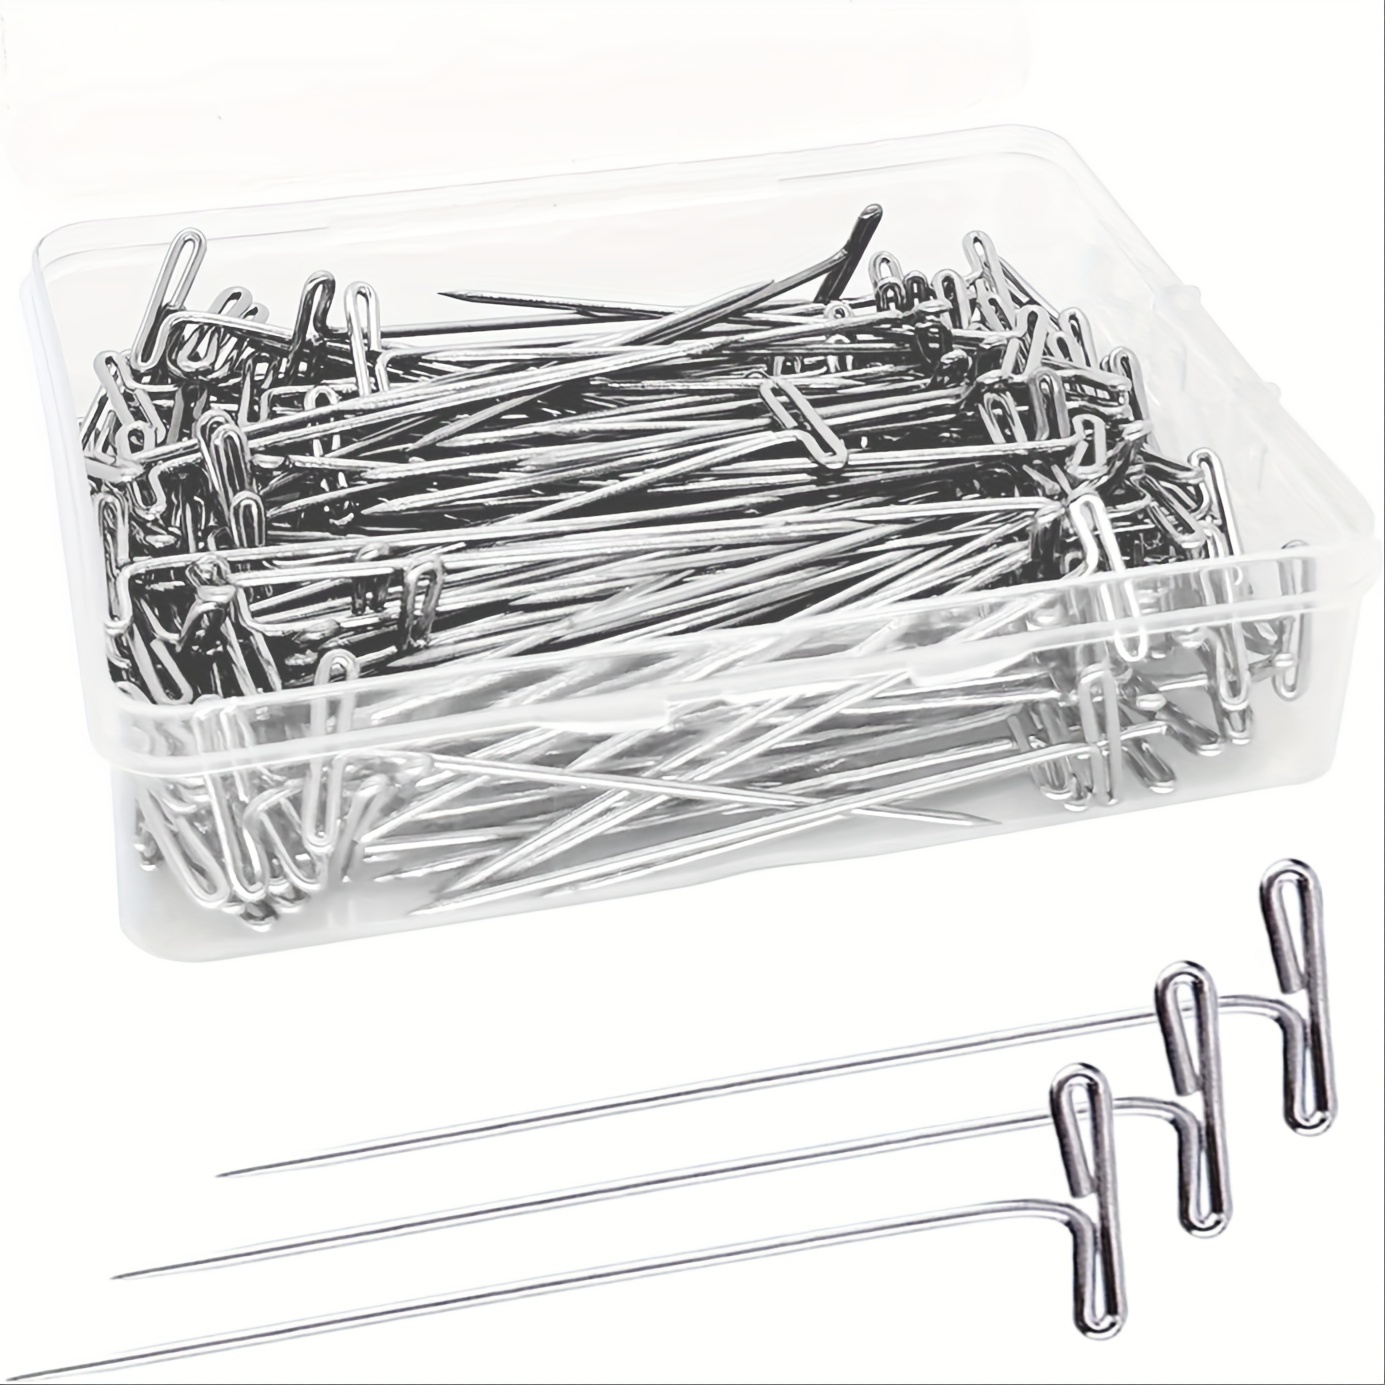  T Pins, 100 Pack 1.5 inch T-Pins, T Pins for Blocking Knitting,  Wig Pins, T Pins for Wigs, Wig Pins for Foam Head, T Pins for Sewing, Wig T  Pins, Blocking